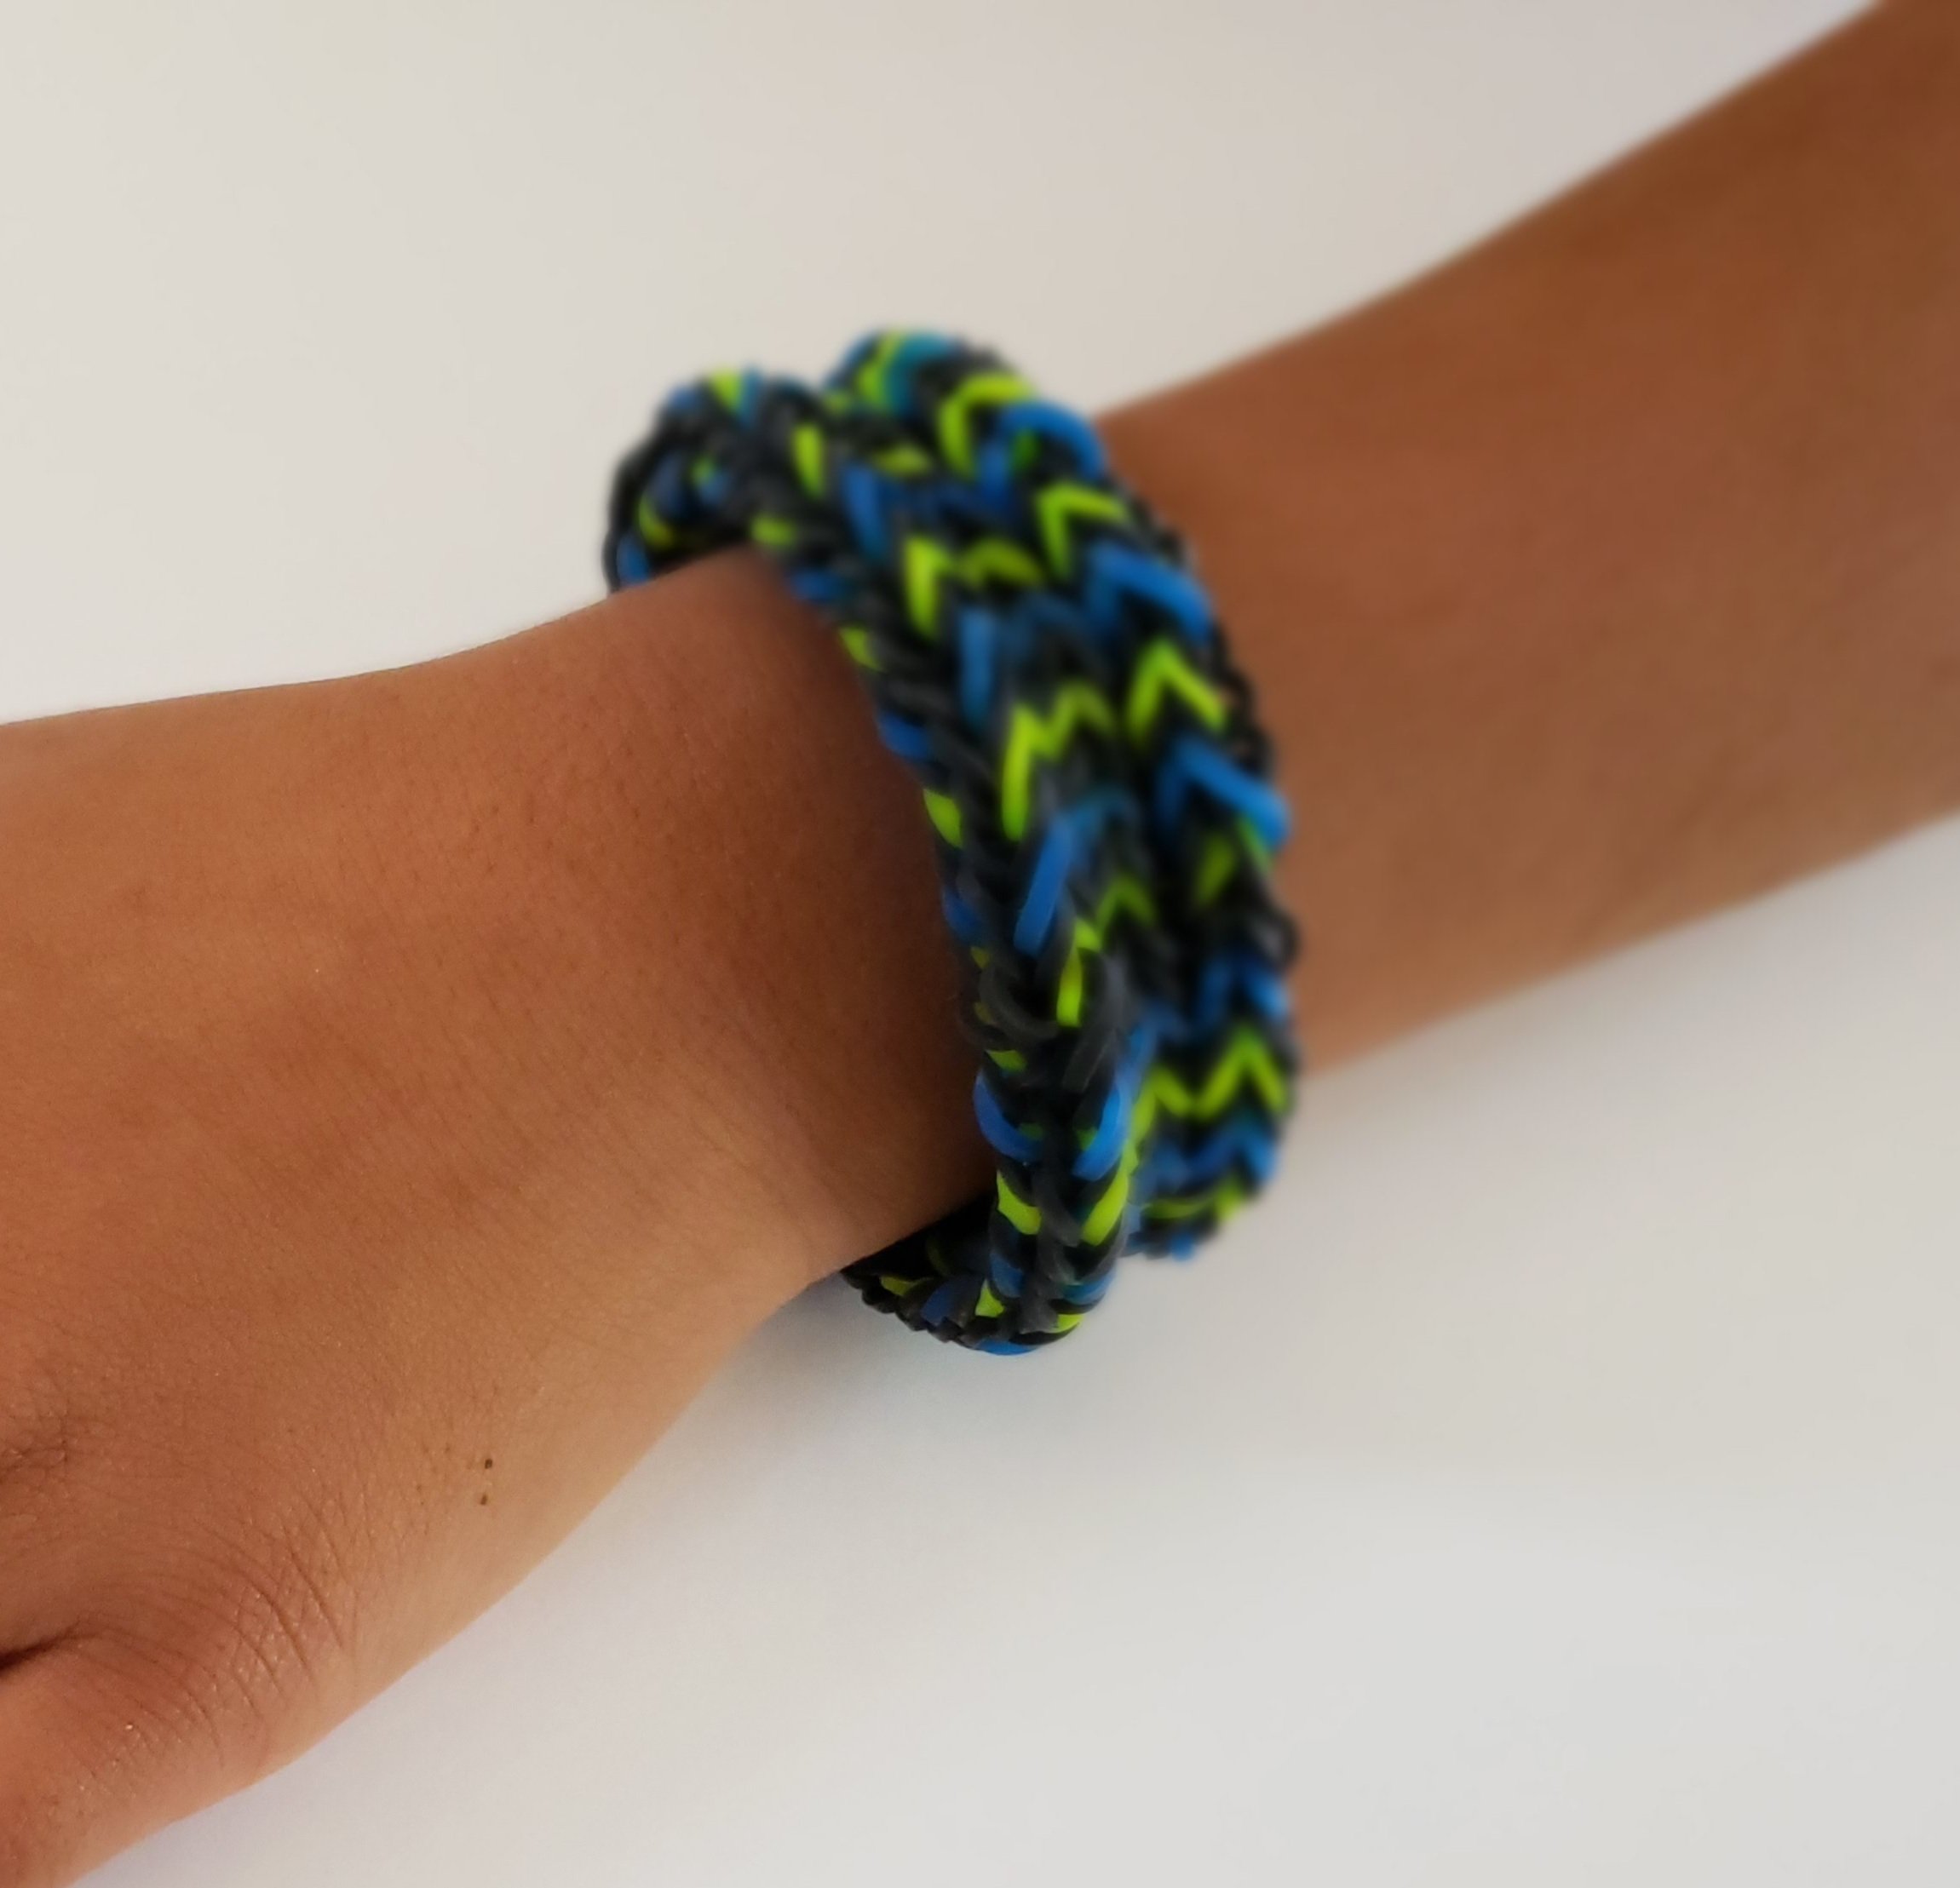 Double Rainbow Loom Bracelet : 7 Steps (with Pictures) - Instructables